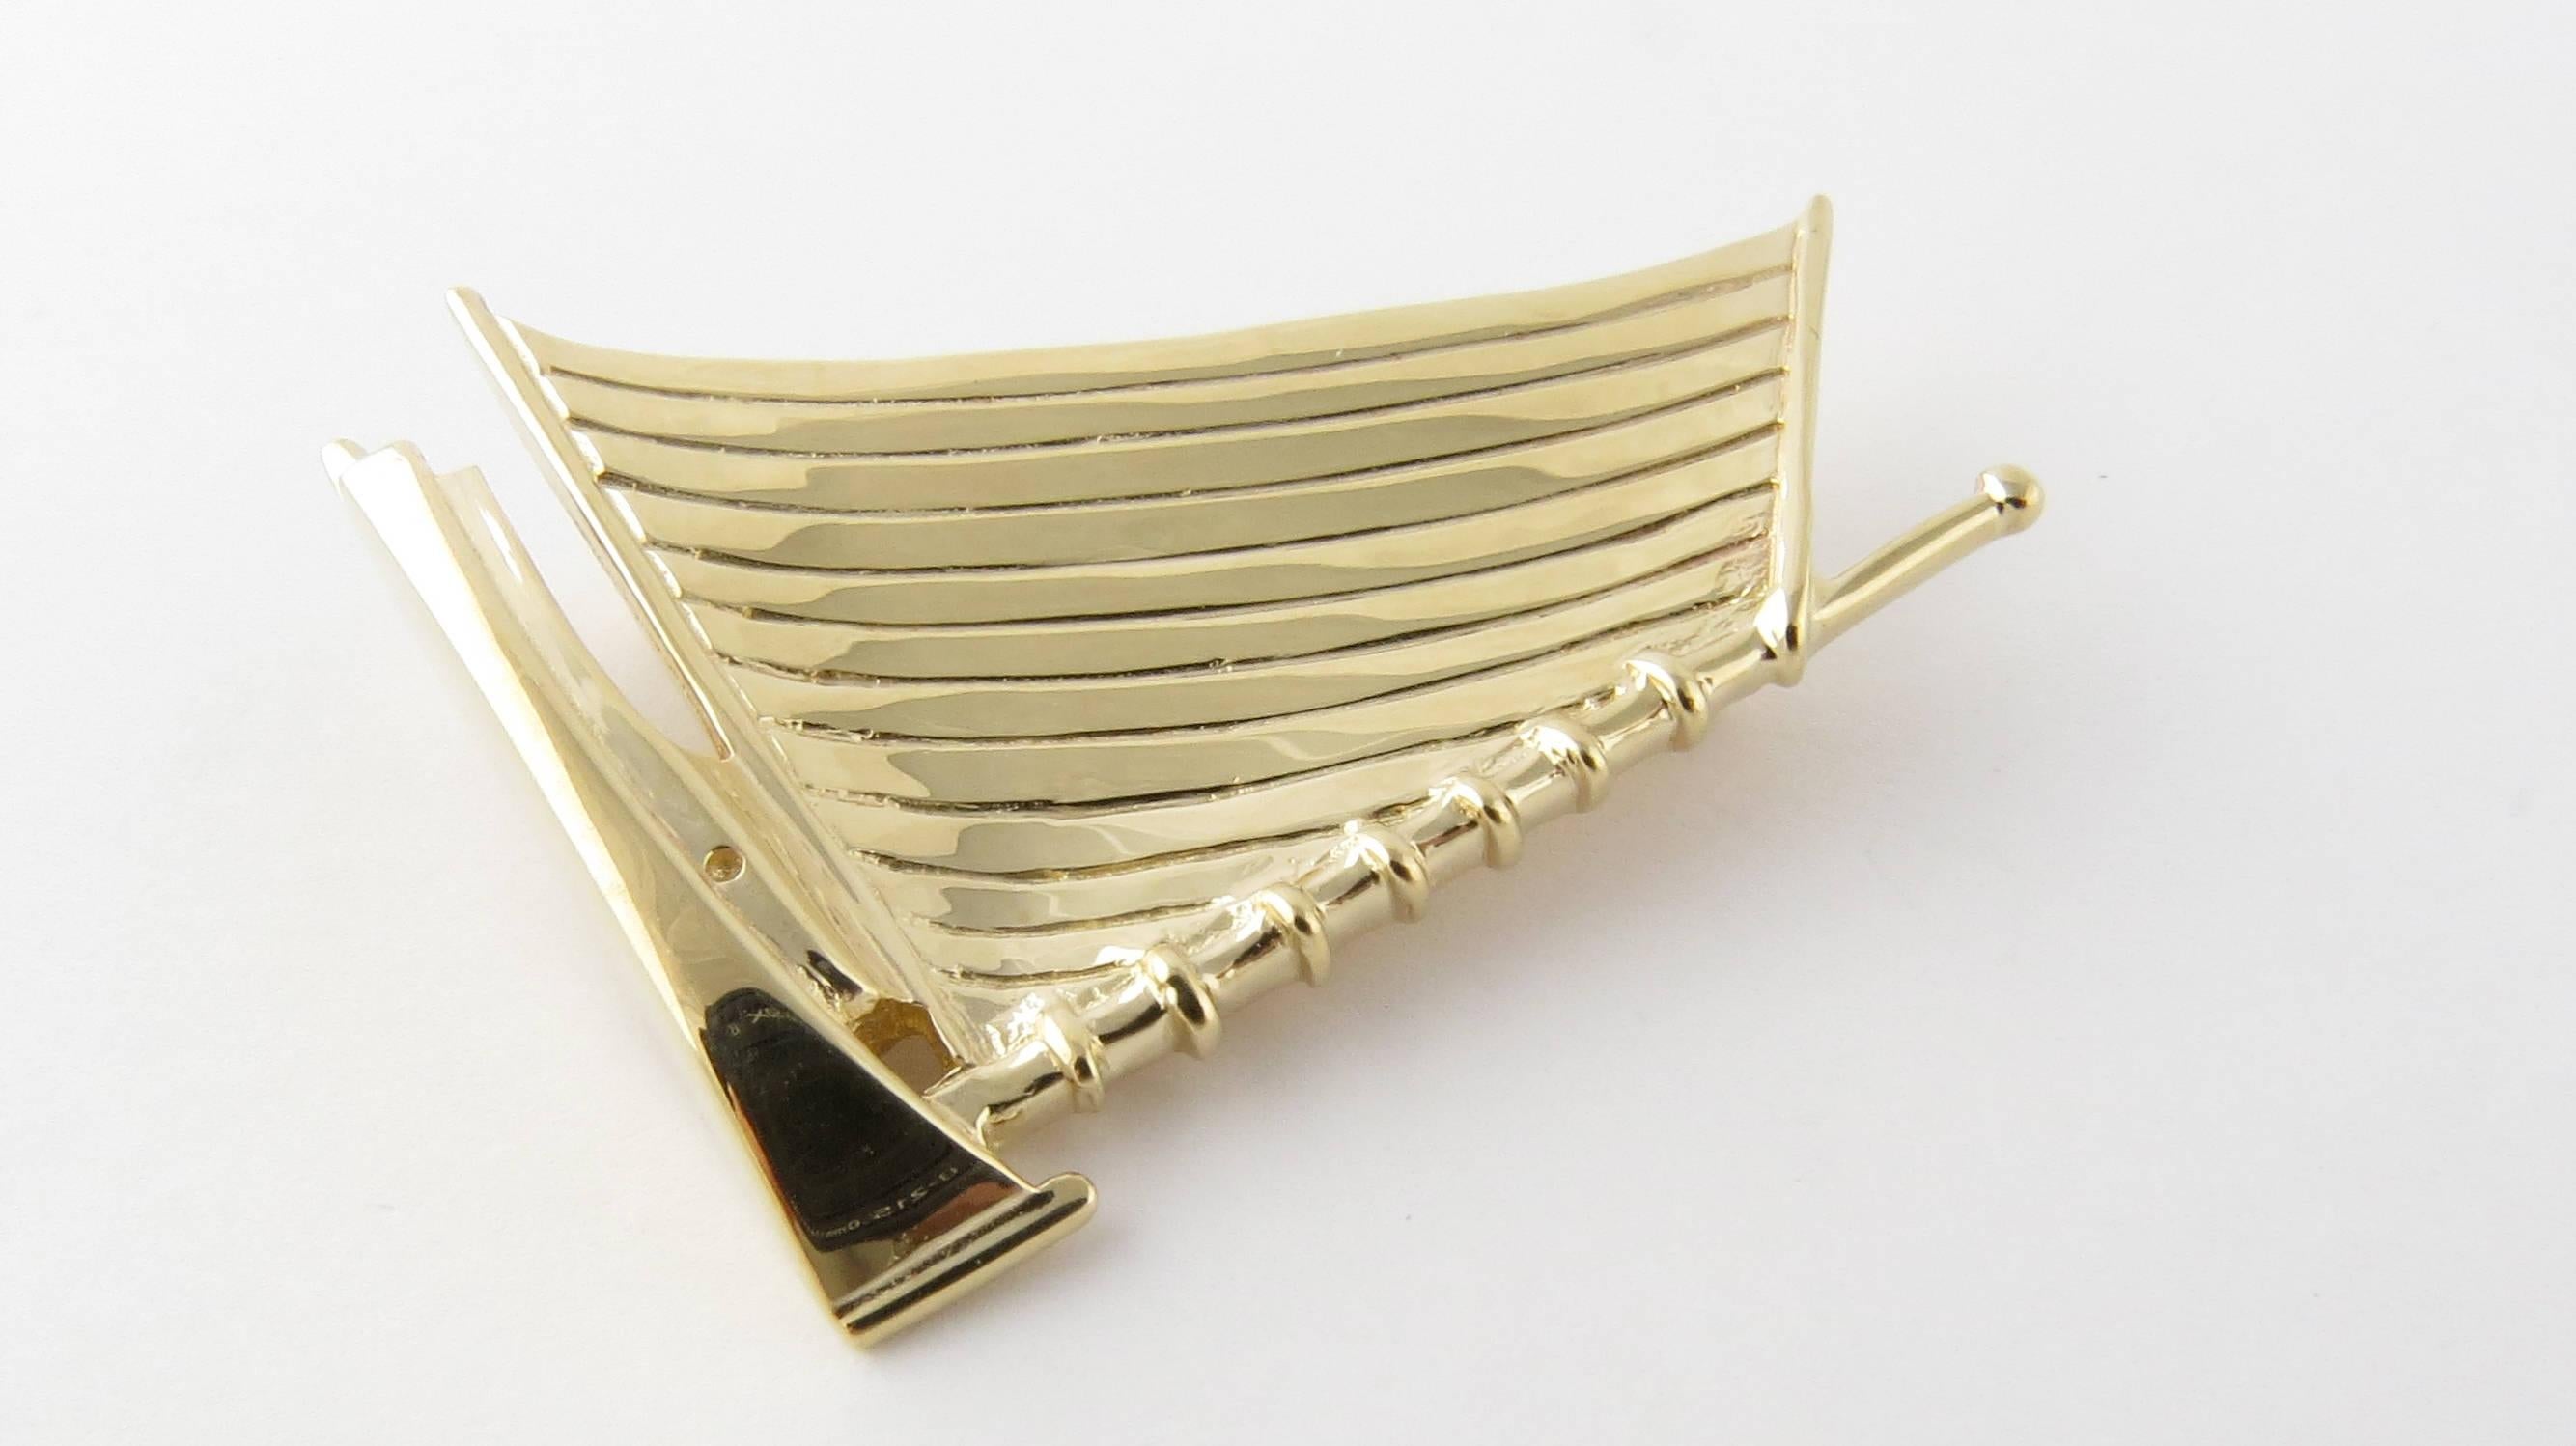 Vintage 14 Karat Yellow Gold Sailboat Pin/Brooch

This stunning 3D brooch features a exquisitely crafted sailboat in meticulously detailed 14K gold. Back of brooch reads 